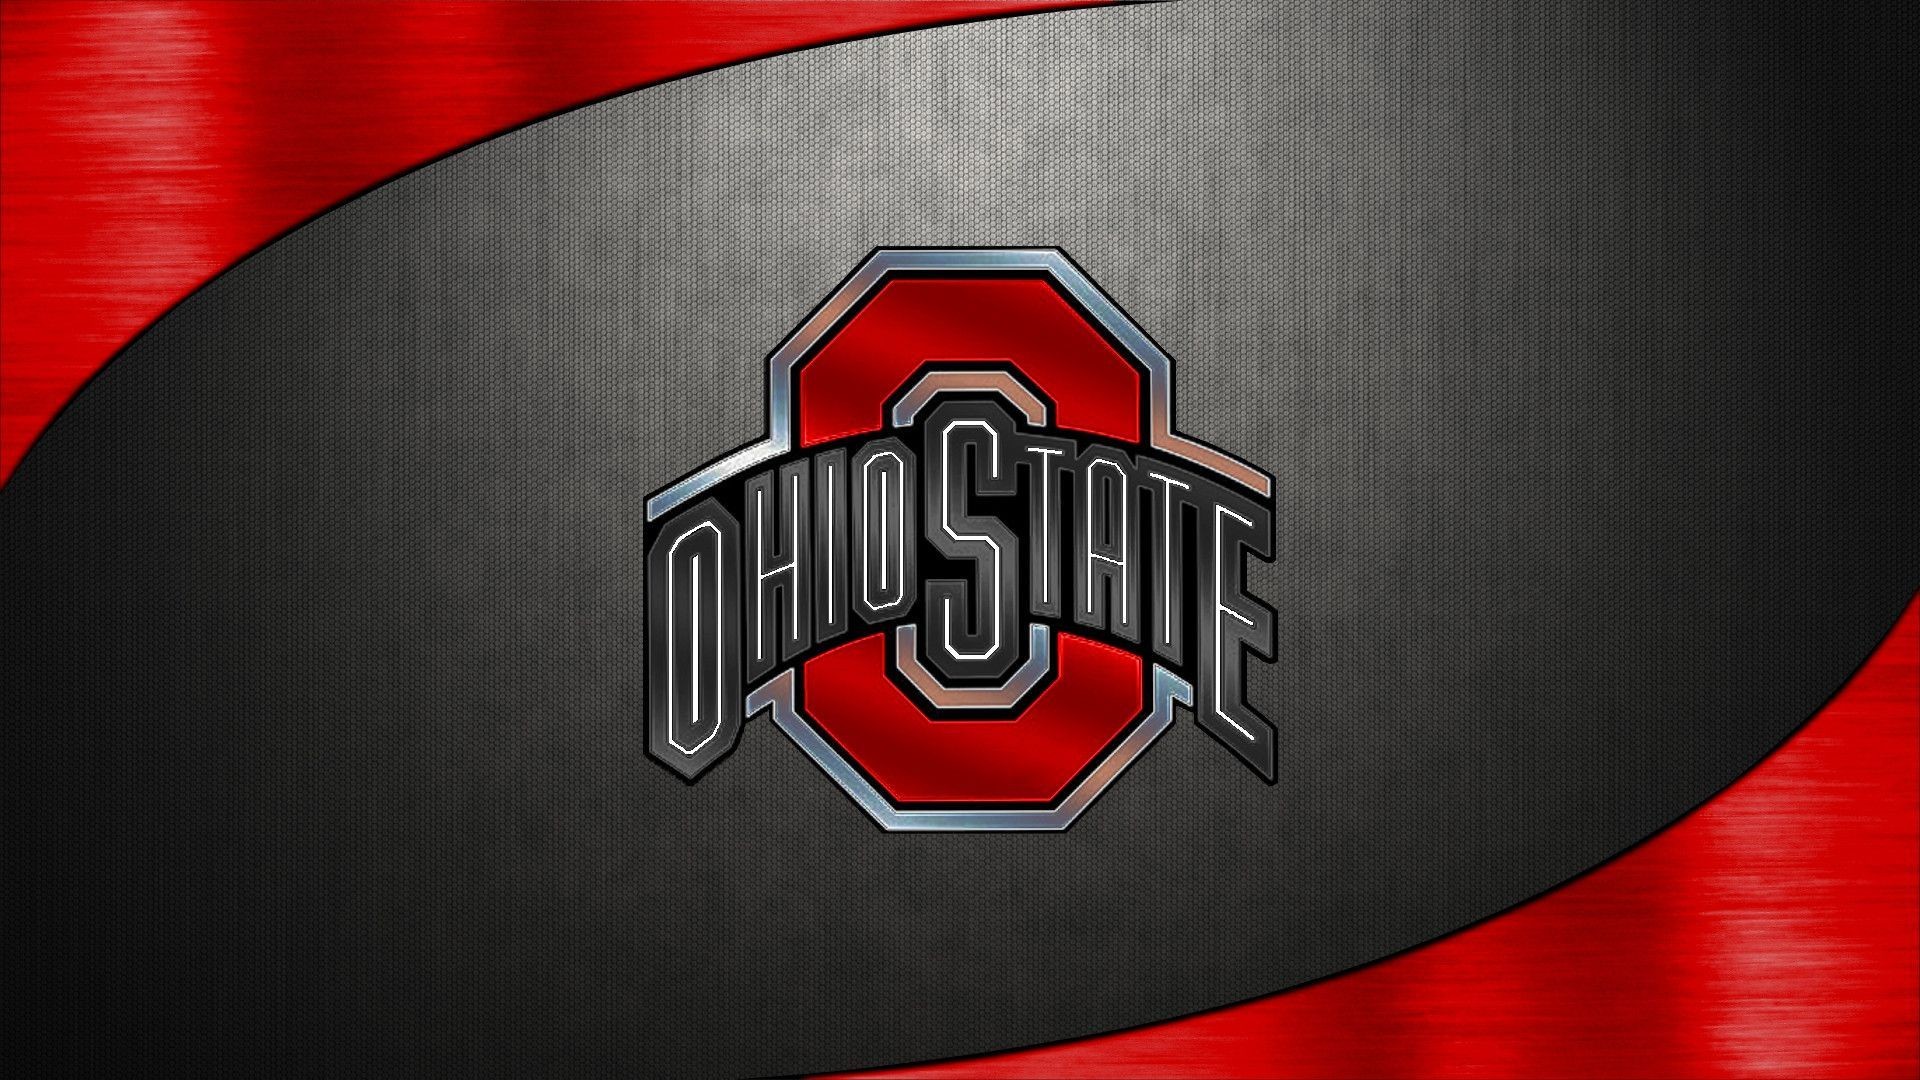 Ohio State Football Wallpaper | HD Wallpapers | Pinterest | Wallpaper and  Hd wallpaper